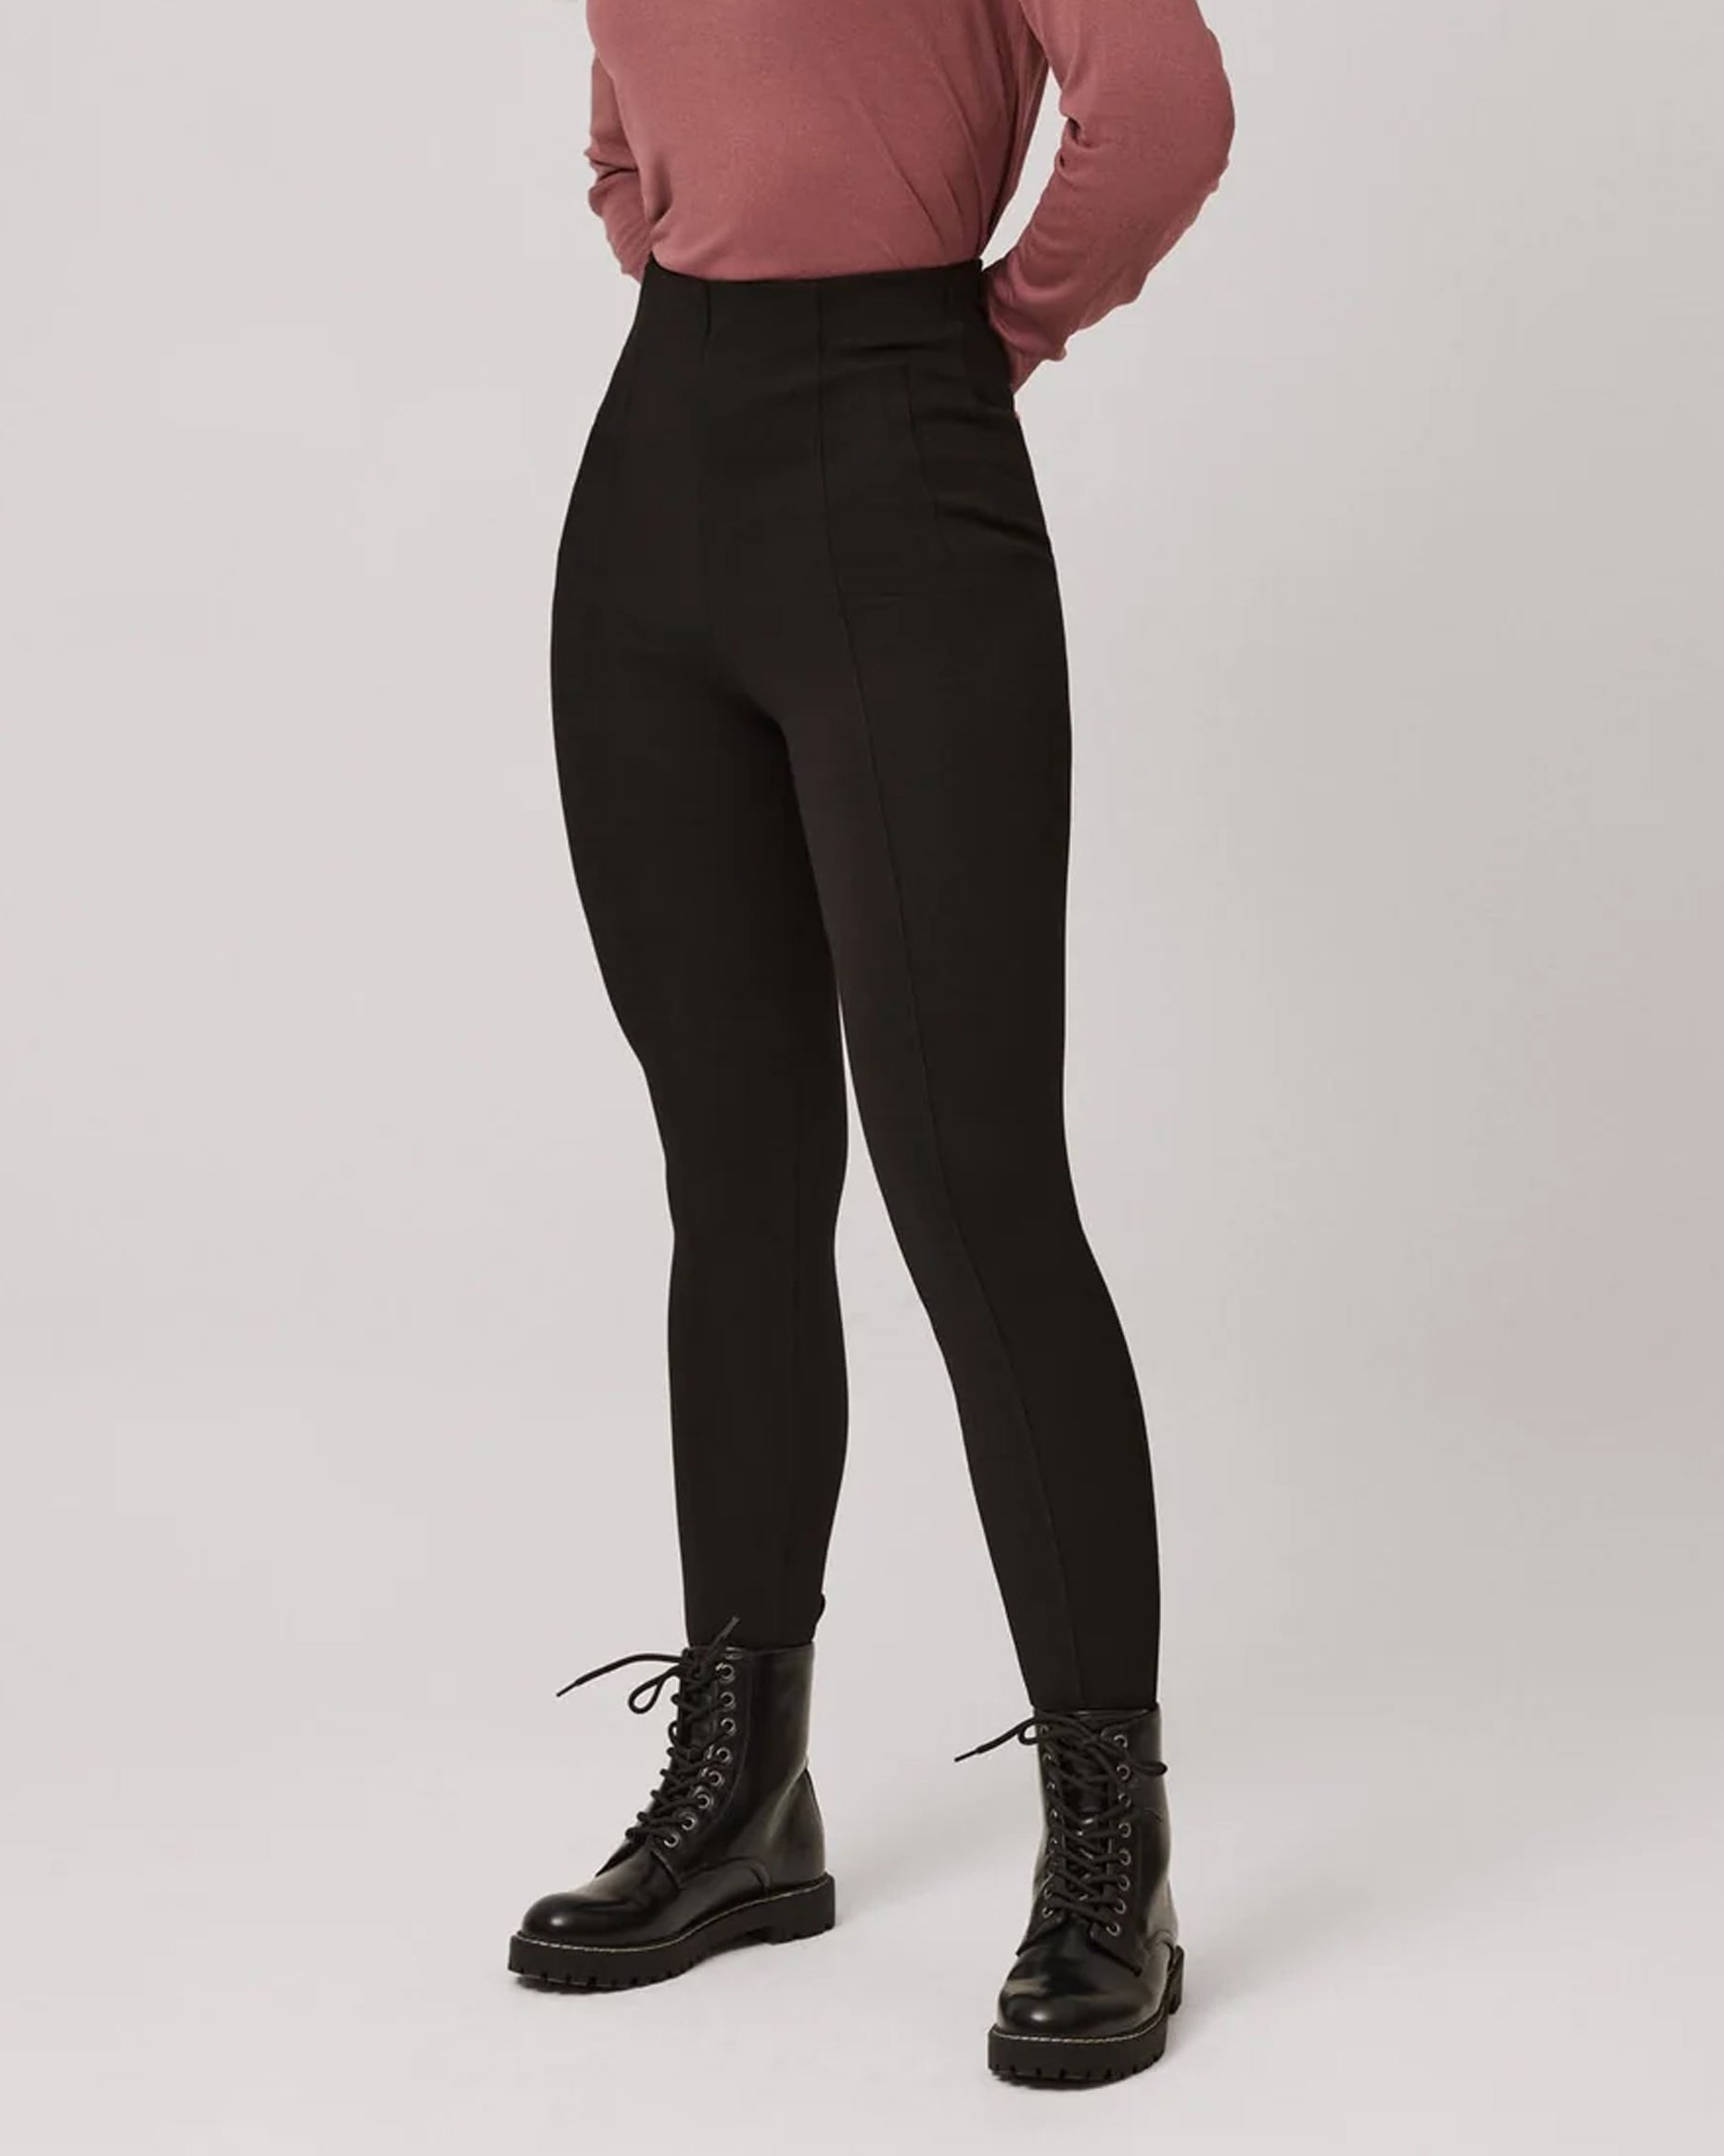 Ysabel Mora 70290 High Rise Treggings - Black high waisted trouser leggings (treggings) with shaped darted waist and centre seams down the front of the leg.